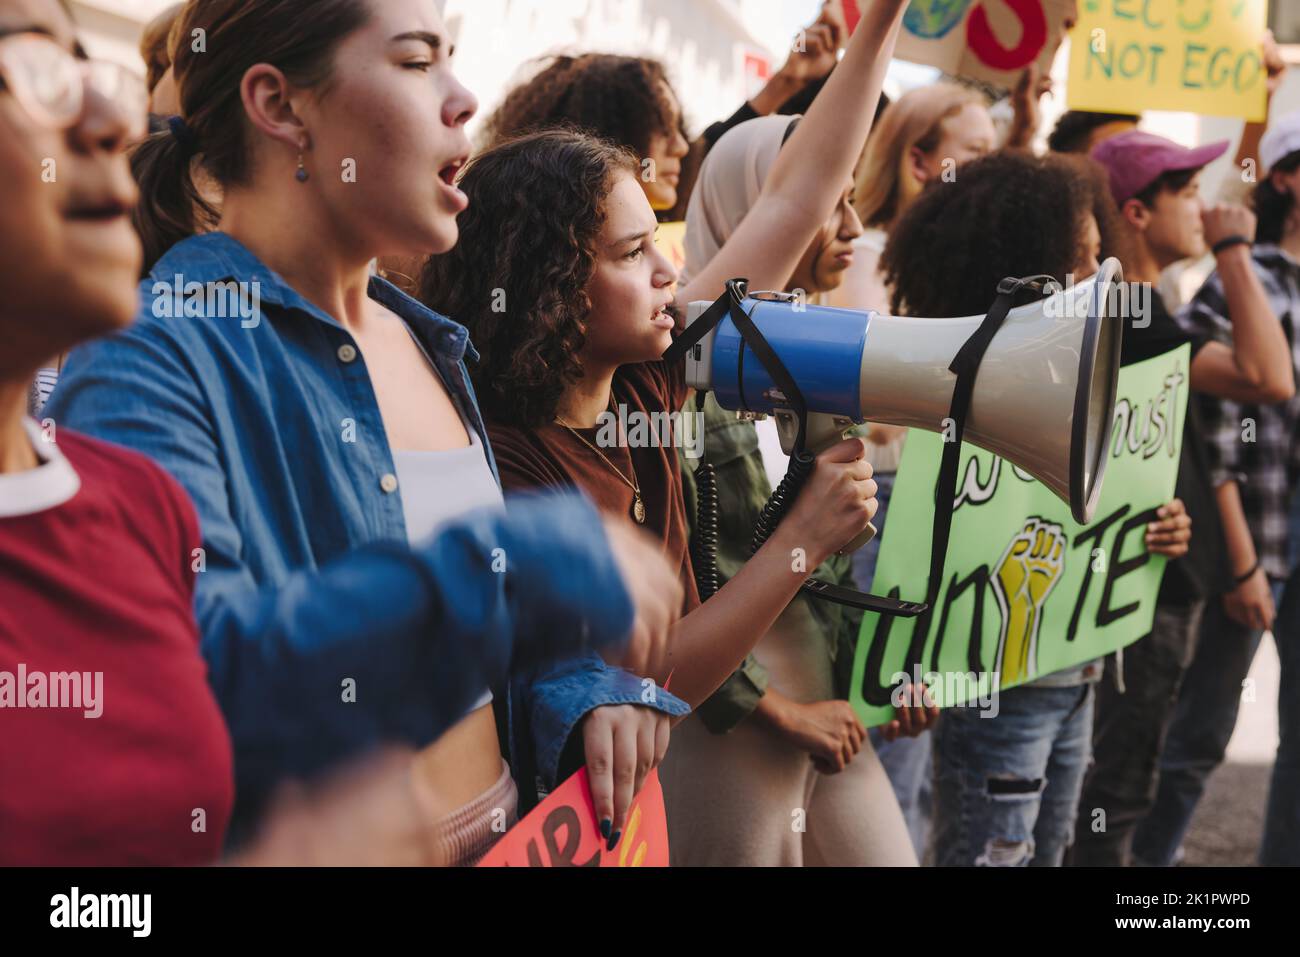 Diverse young people marching for climate justice with banners and a megaphone. Group of multicultural youth activists protesting against global warmi Stock Photo